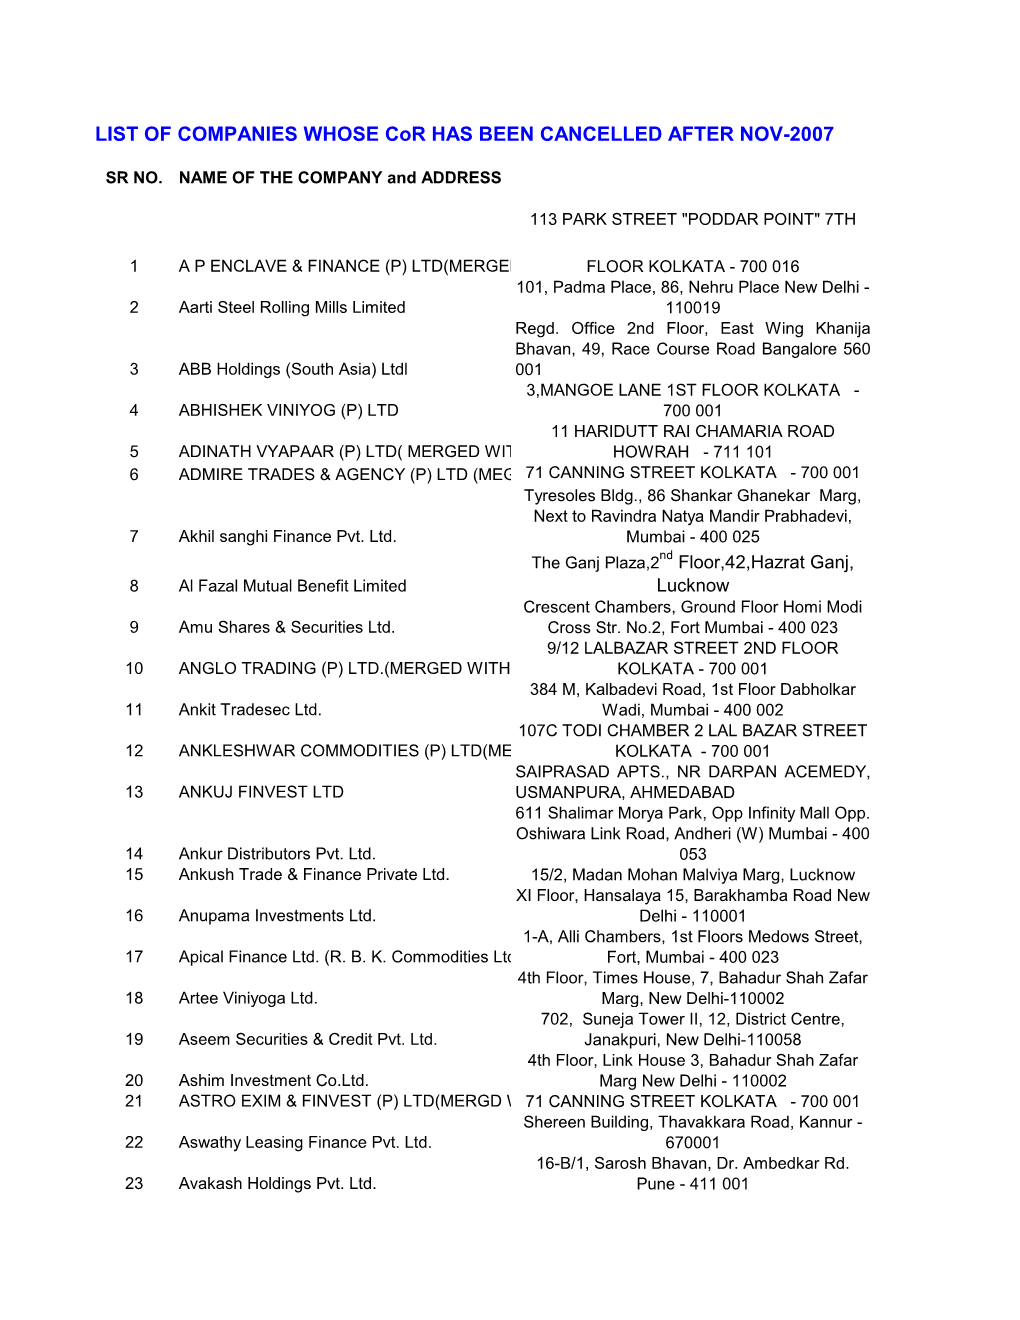 LIST of COMPANIES WHOSE Cor HAS BEEN CANCELLED AFTER NOV-2007